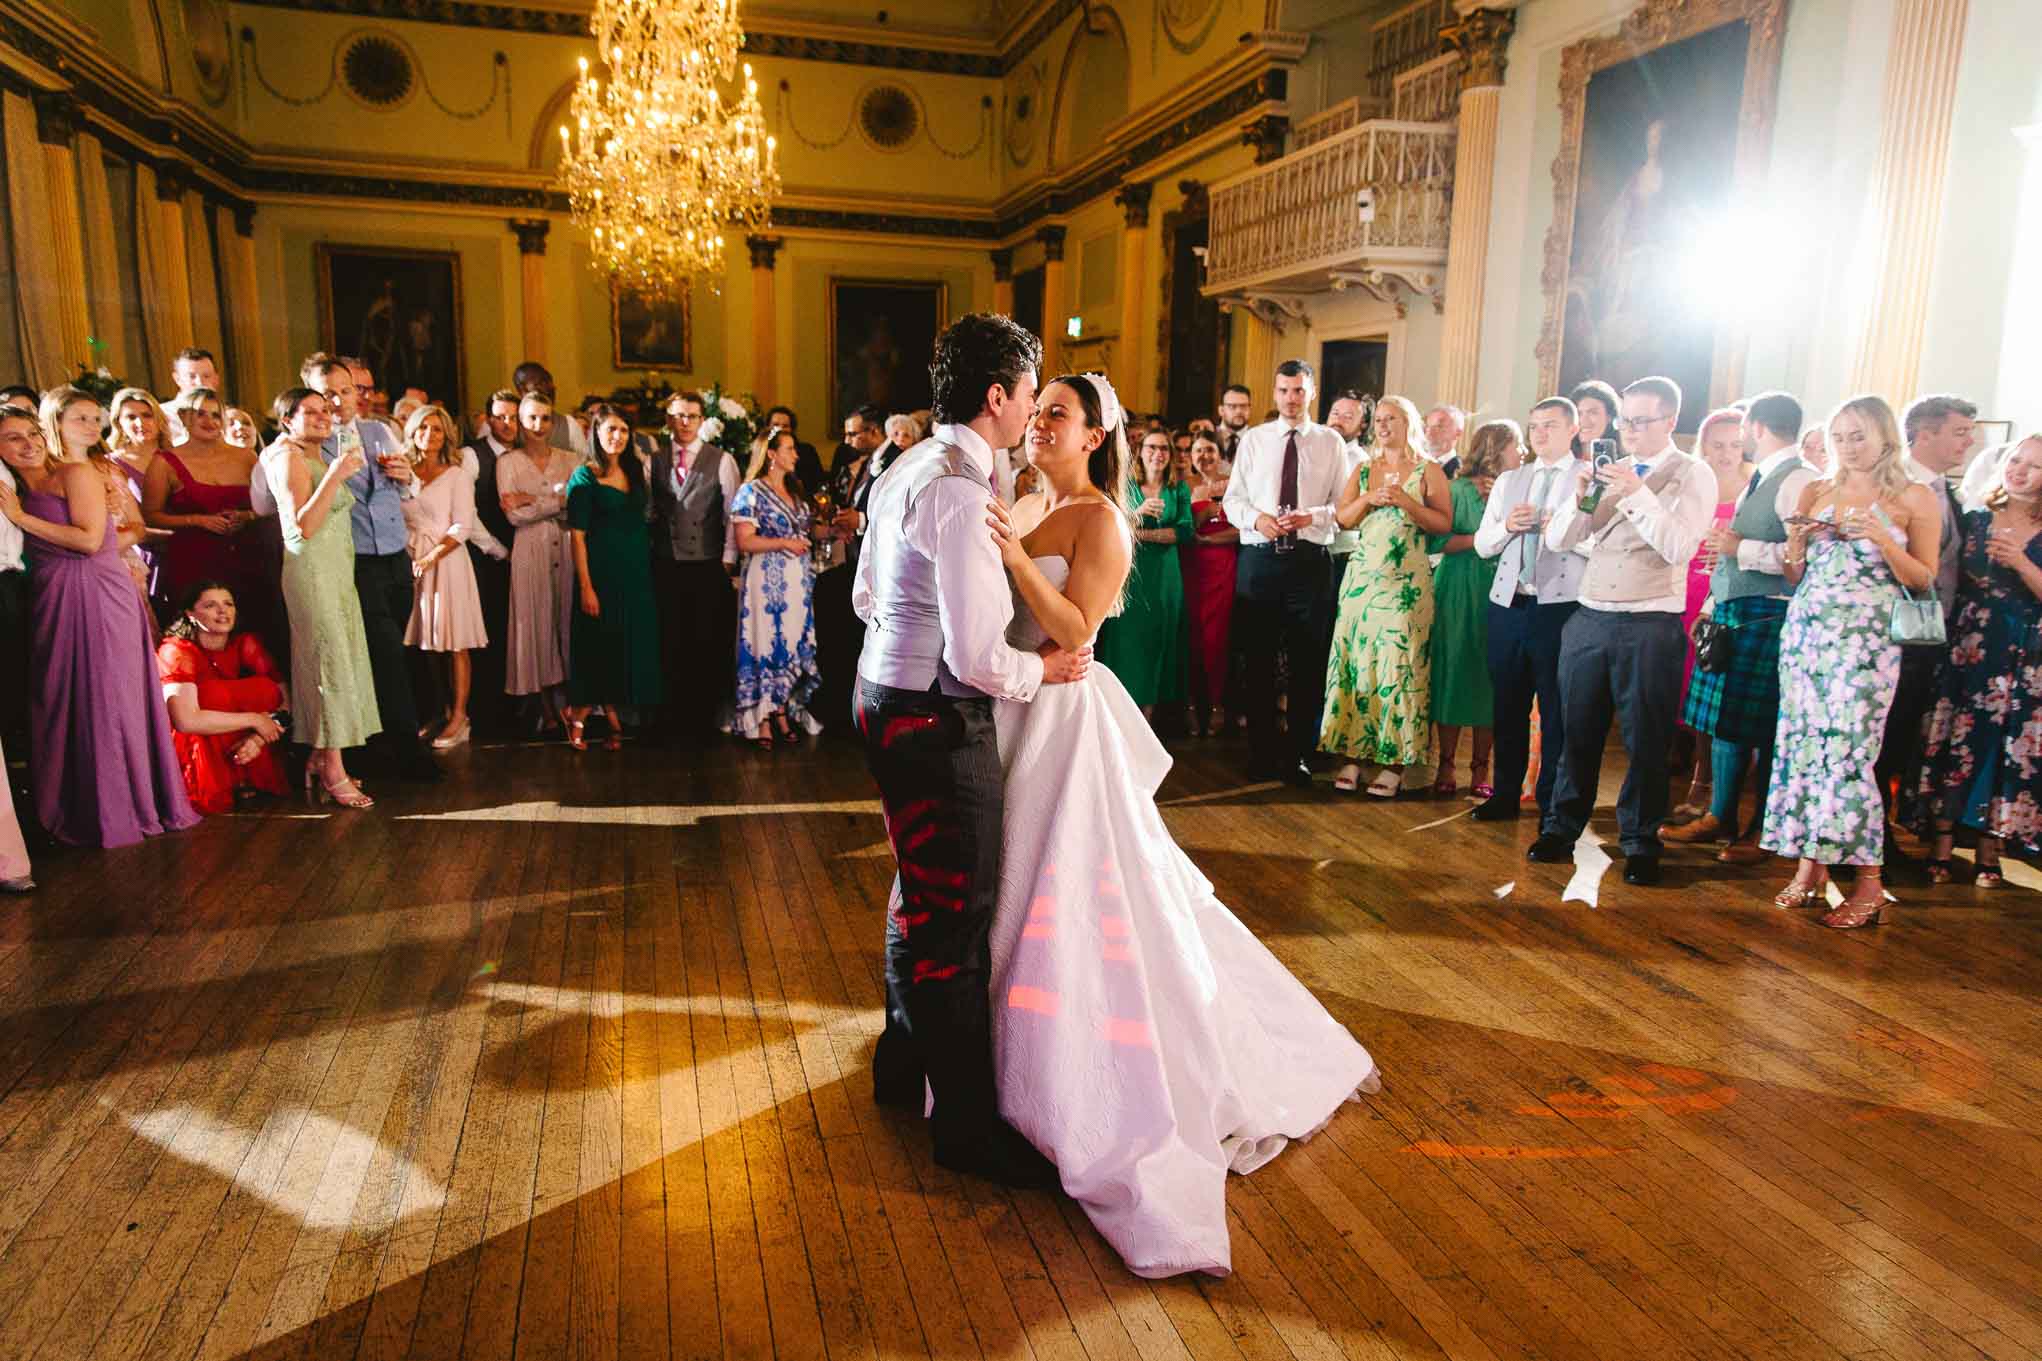 First dance in the Banqueting Room